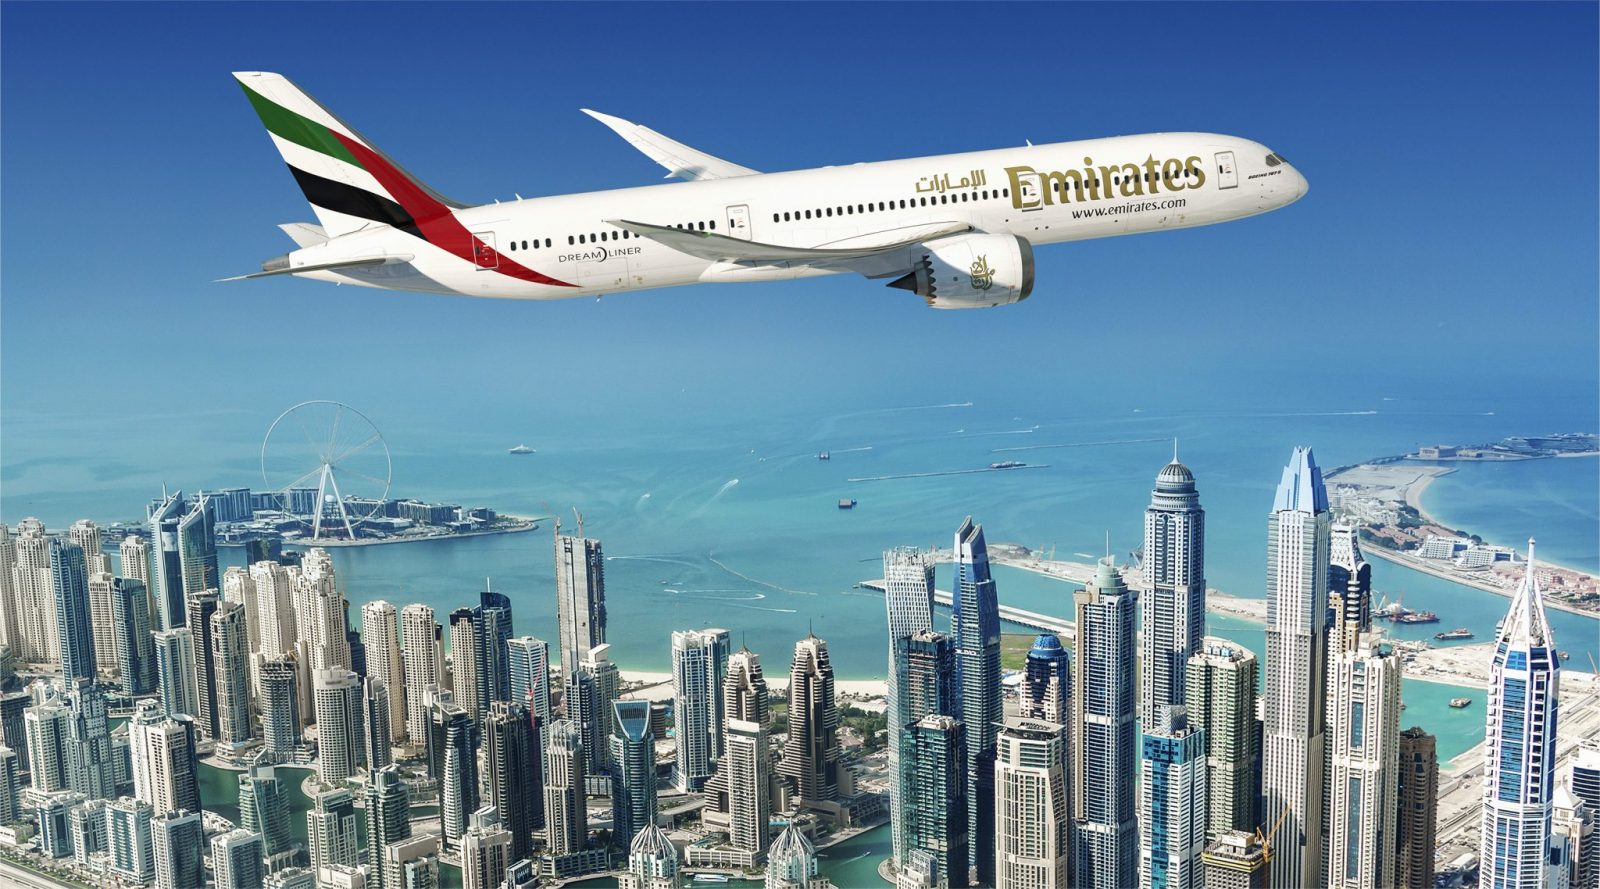 Emirates Confirms New Boeing 787 Dreamliner Deal But... Smaller Than Originally Planned, 777 Order's Reduced